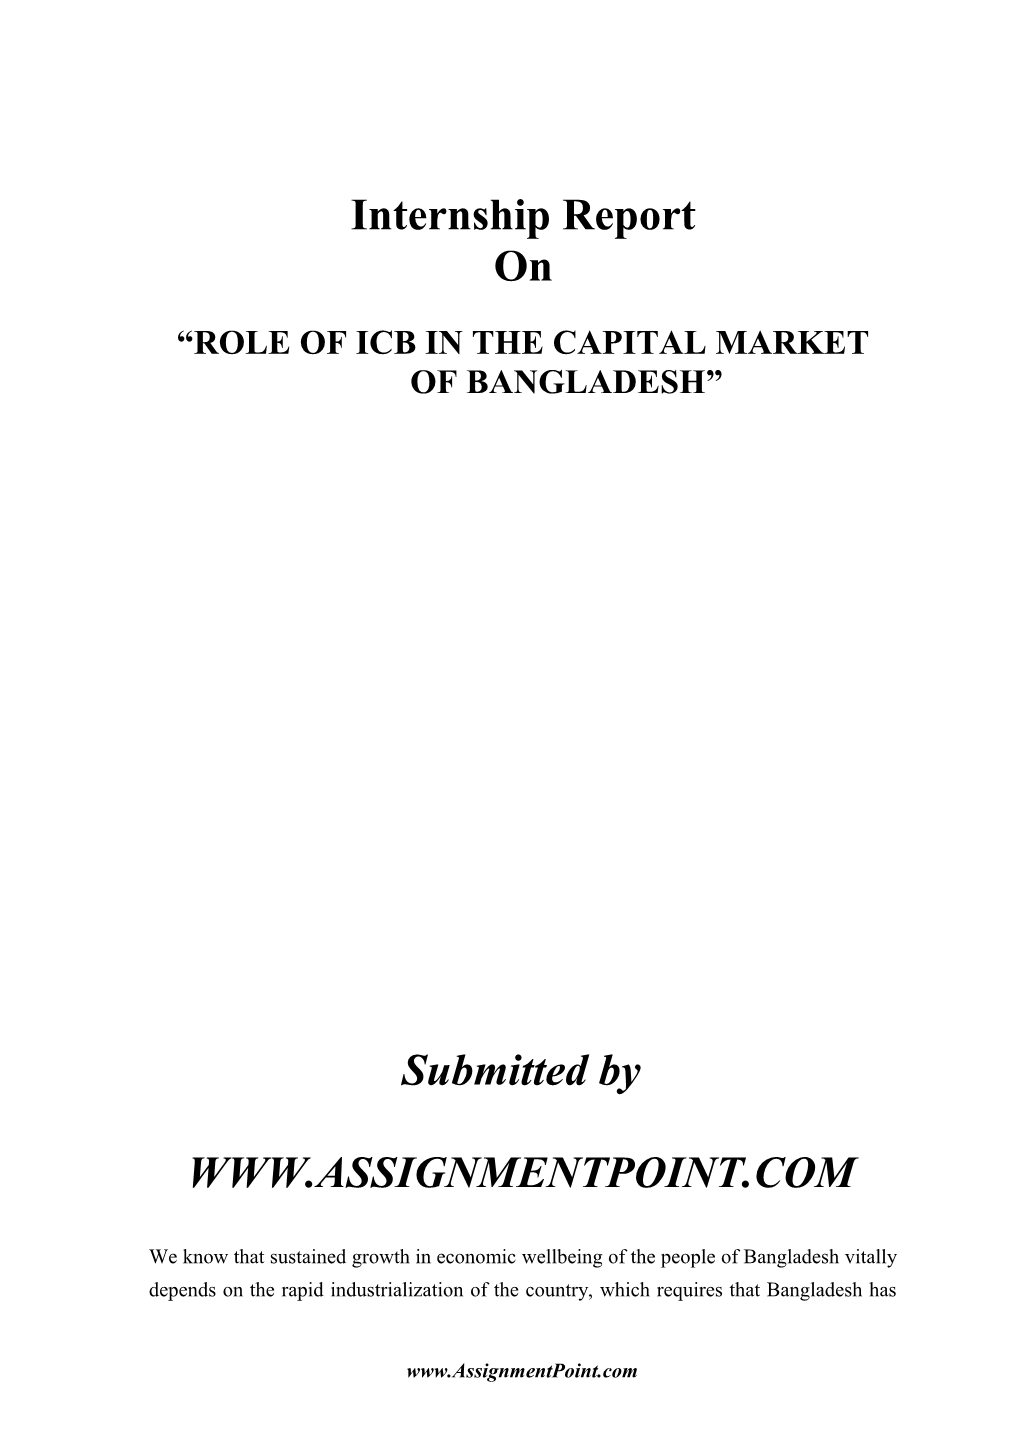 Role of Icb in the Capital Market of Bangladesh